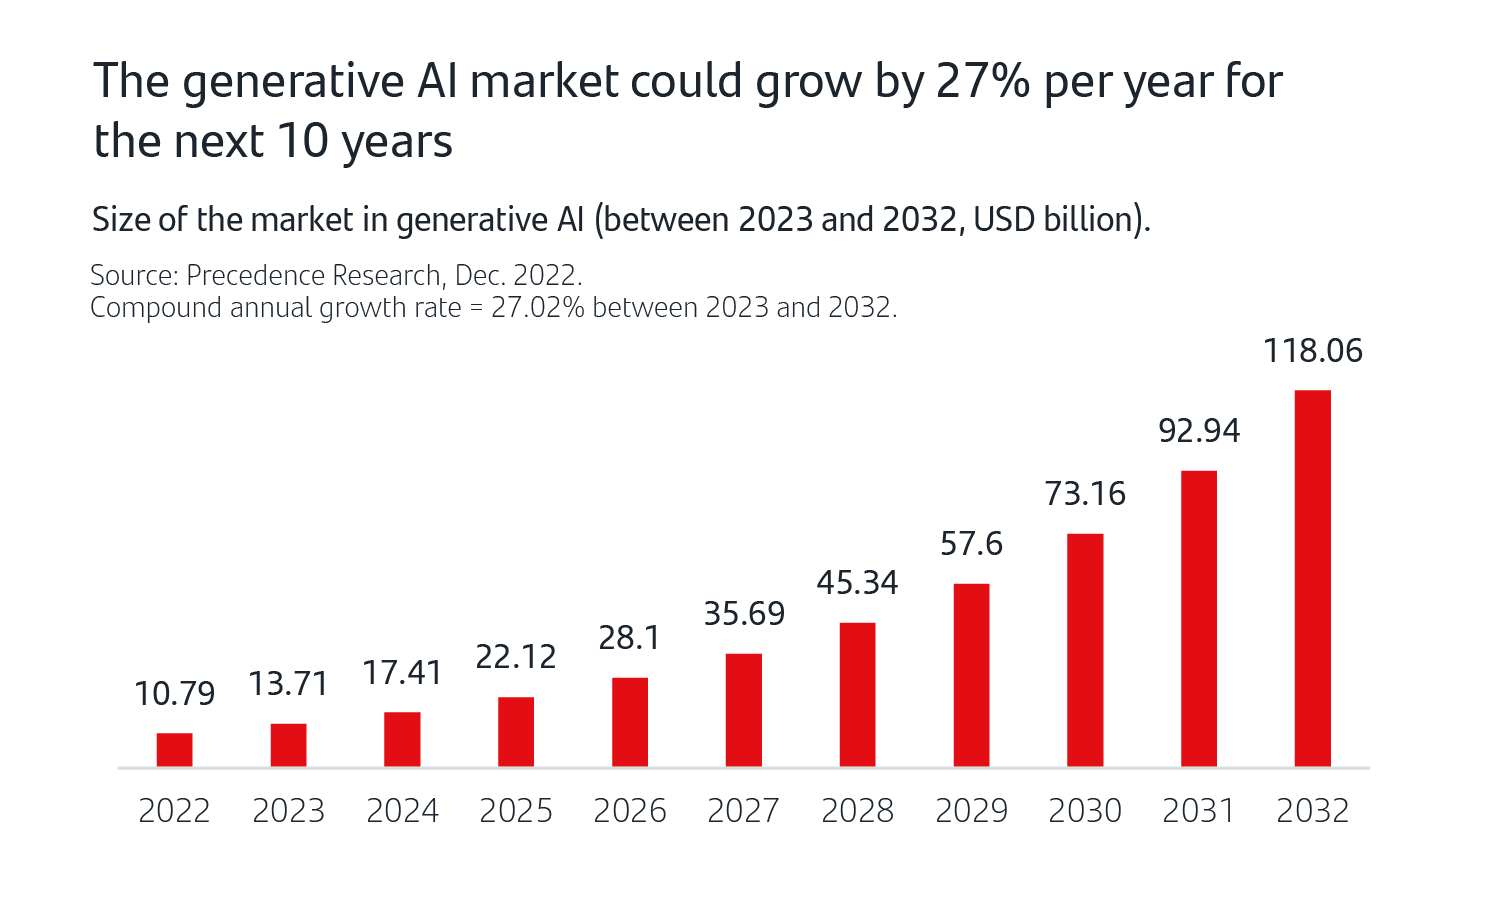 The generative AI market could grow by 27% per year for the next 10 years